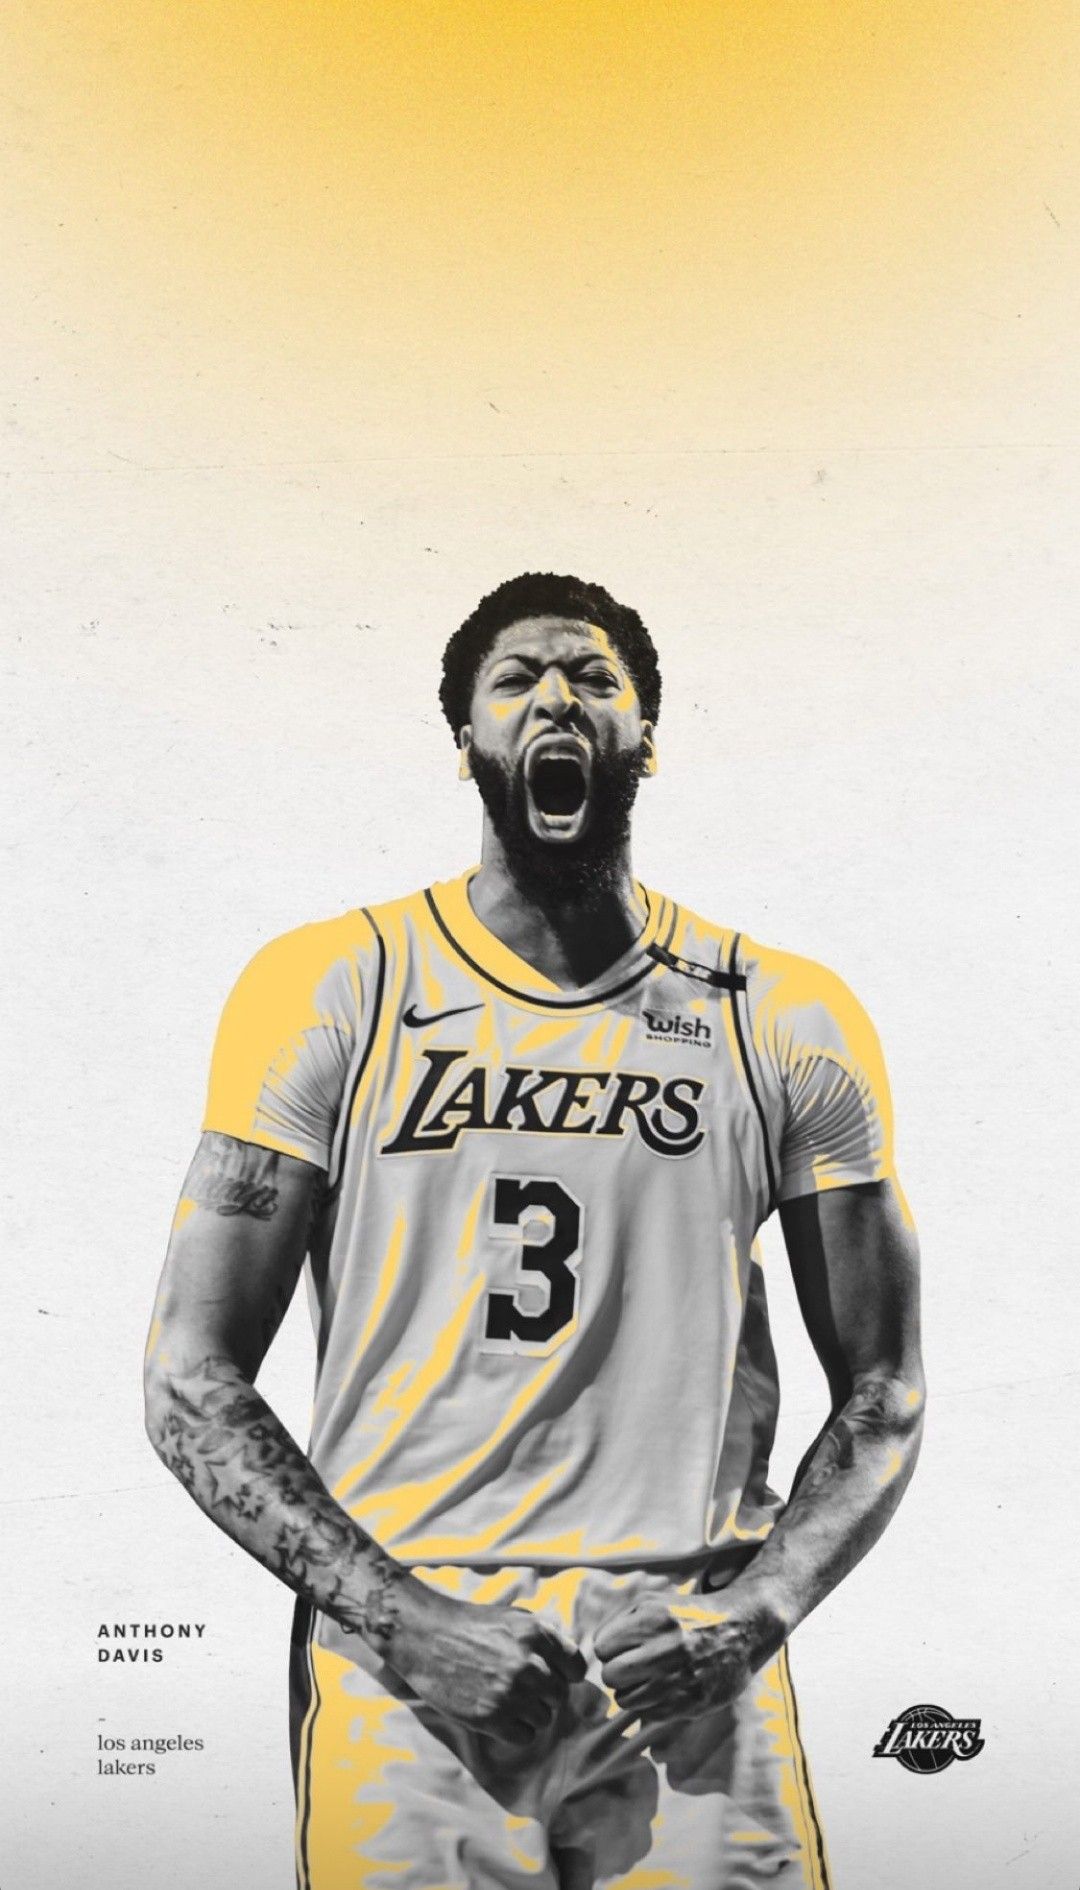 Anthony Davis Lakers wallpaper. Anthony davis, Nba picture, Basketball photography